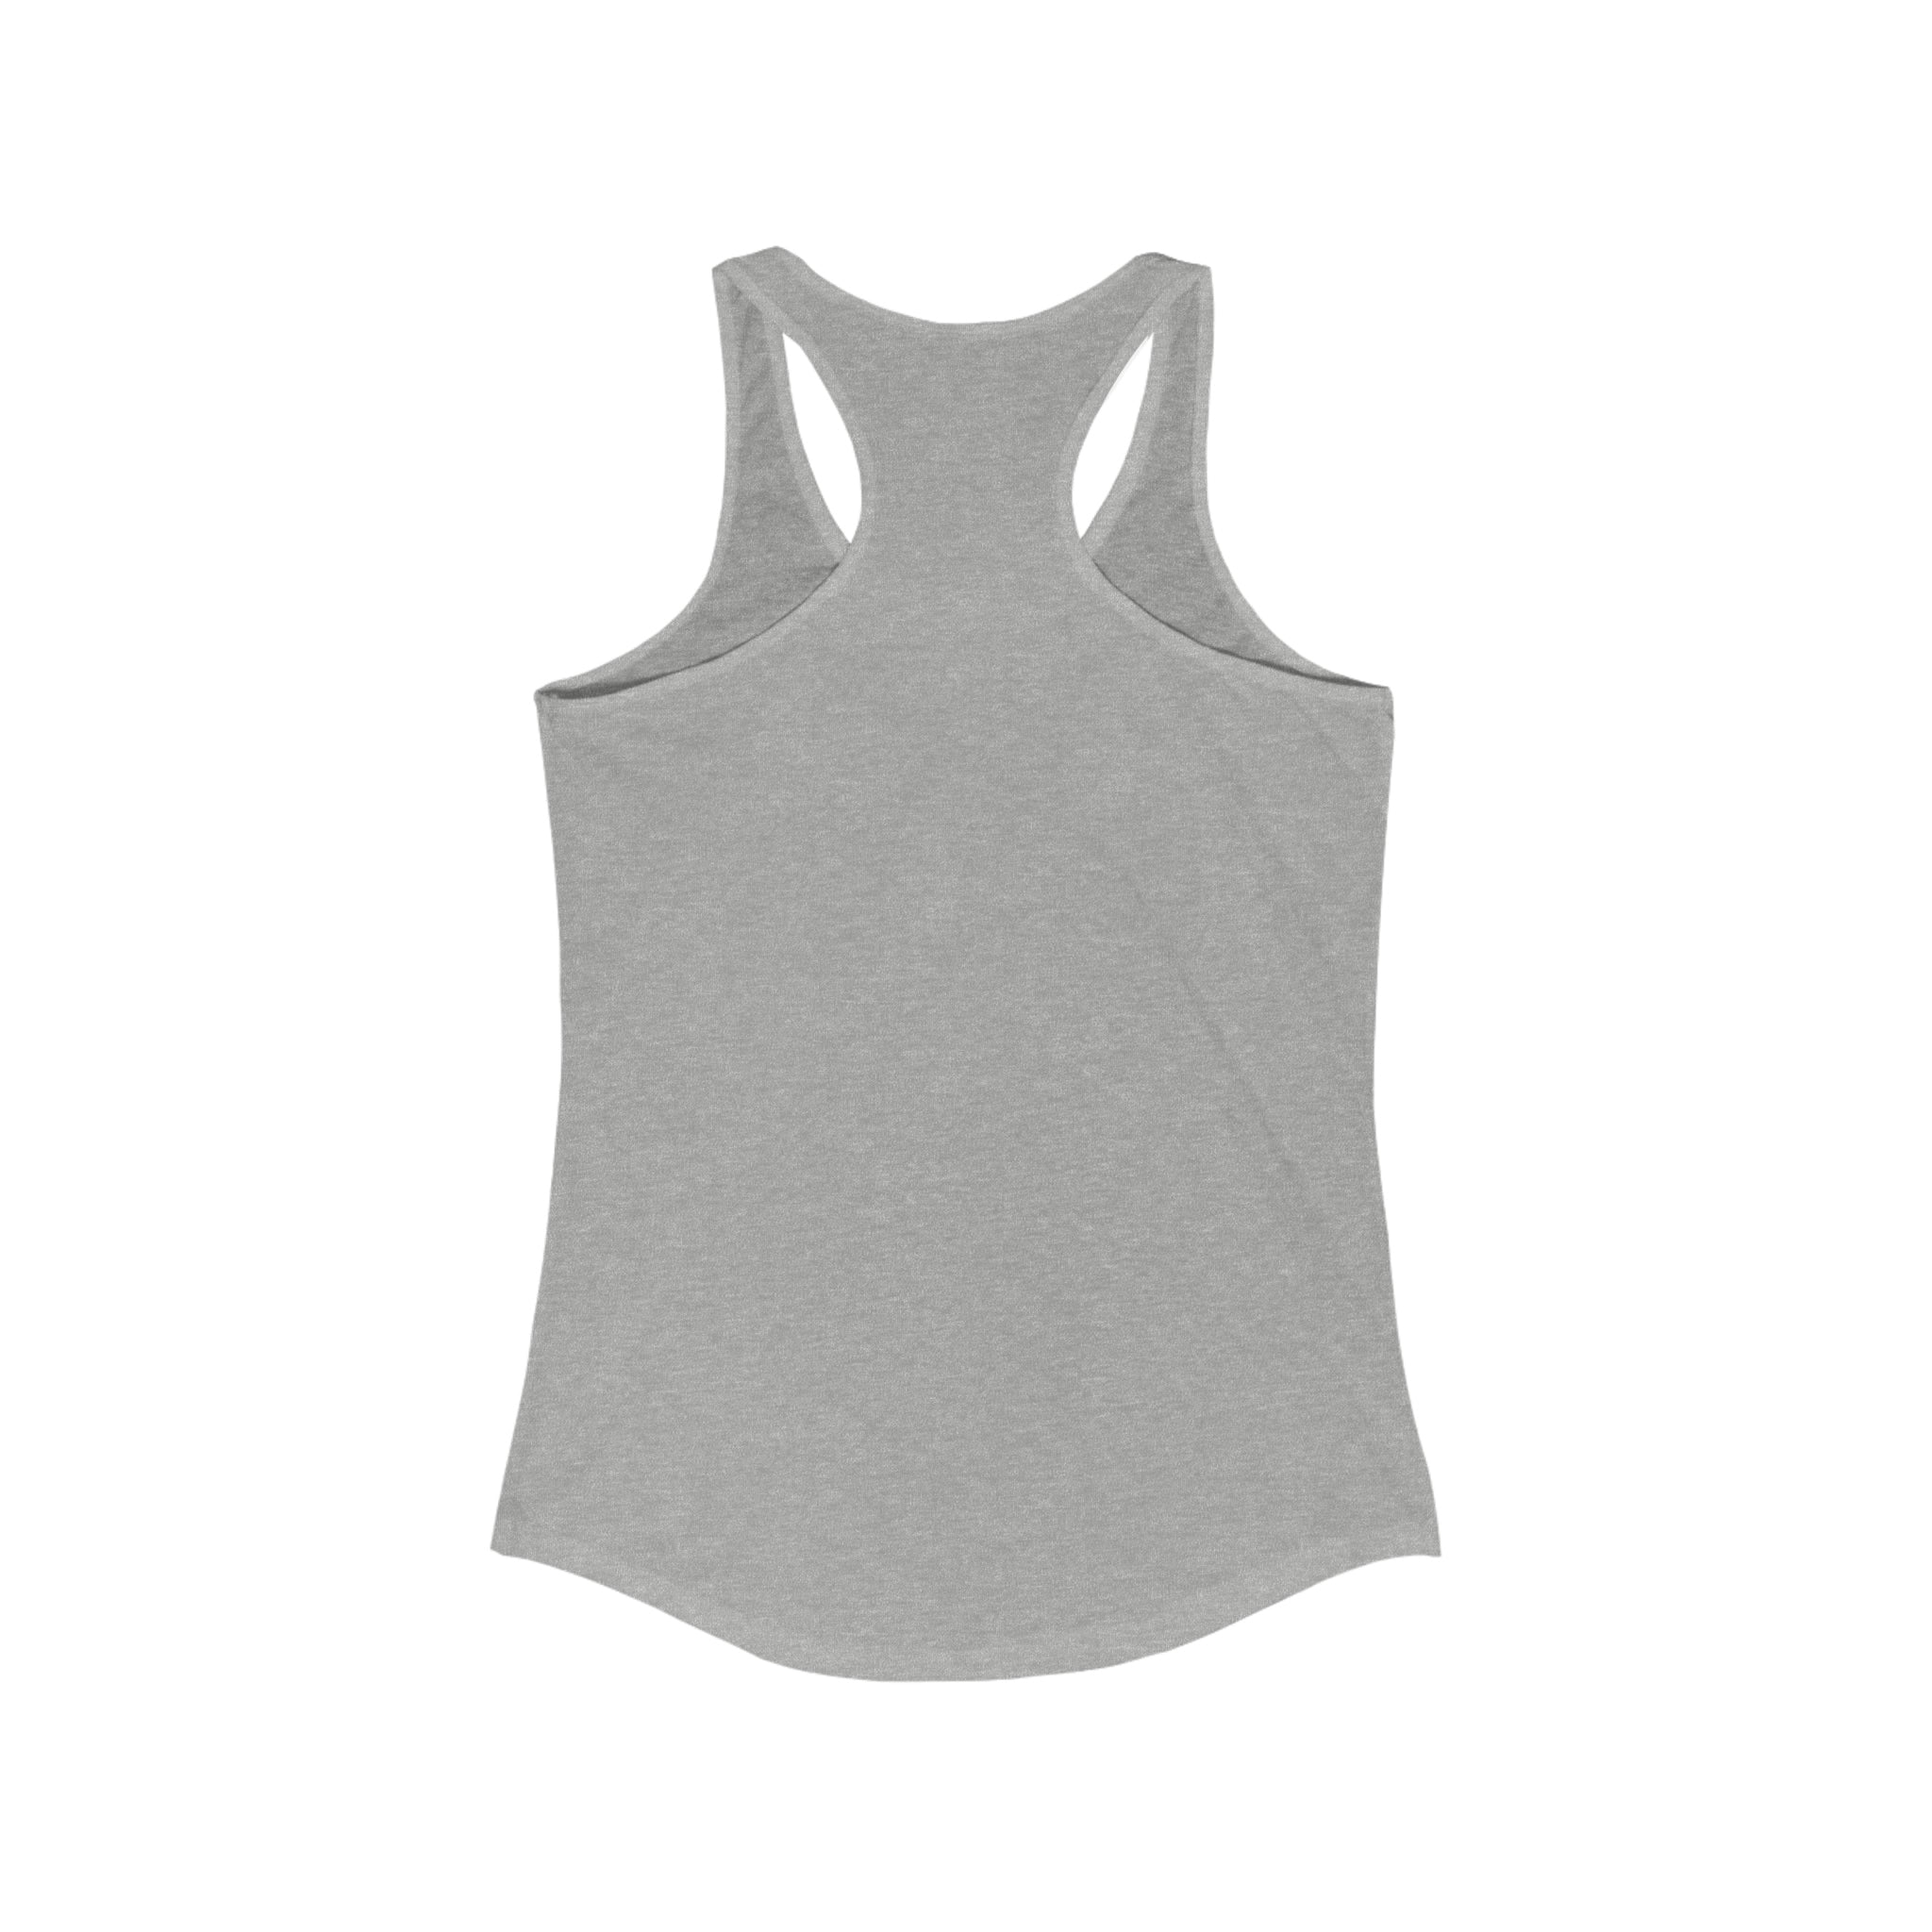 Impossible is just a big word thrown around by small men,  Women's Ideal Racerback Tank